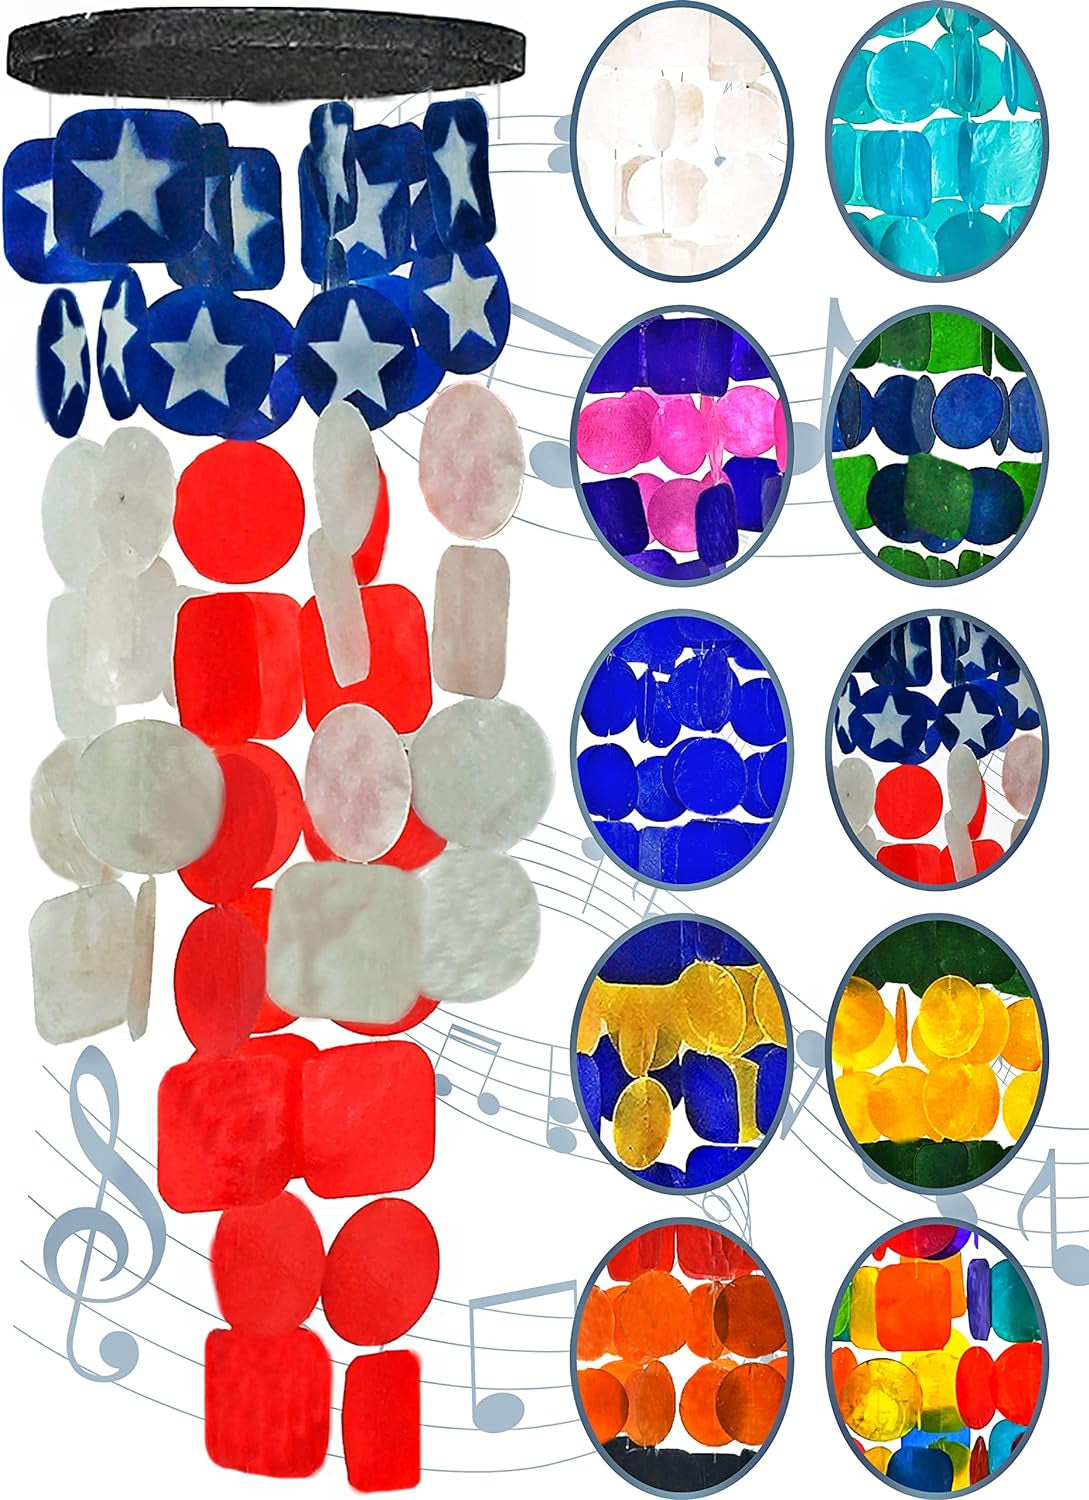 24834 Outdoor Wind Chimes, American Flag Patriotic Stars Stripes Blue Red White USA Windchimes Memorial Sympathy Gift Bereavement 4 July outside Home Decor Garden Patio Yard Seashell 27Inch